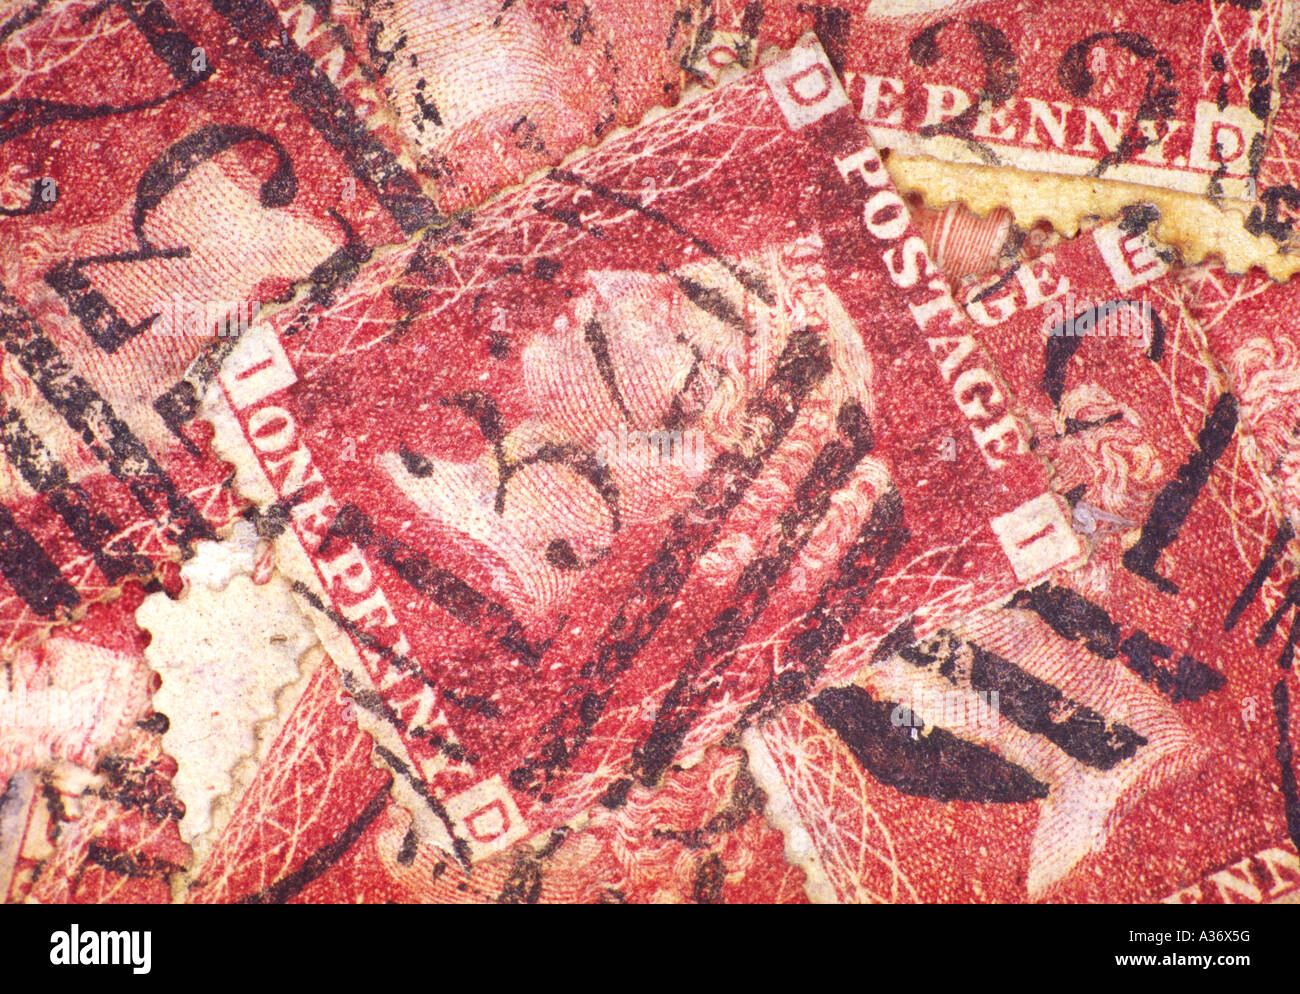 Victorian Penny Red postage stamps Stock Photo